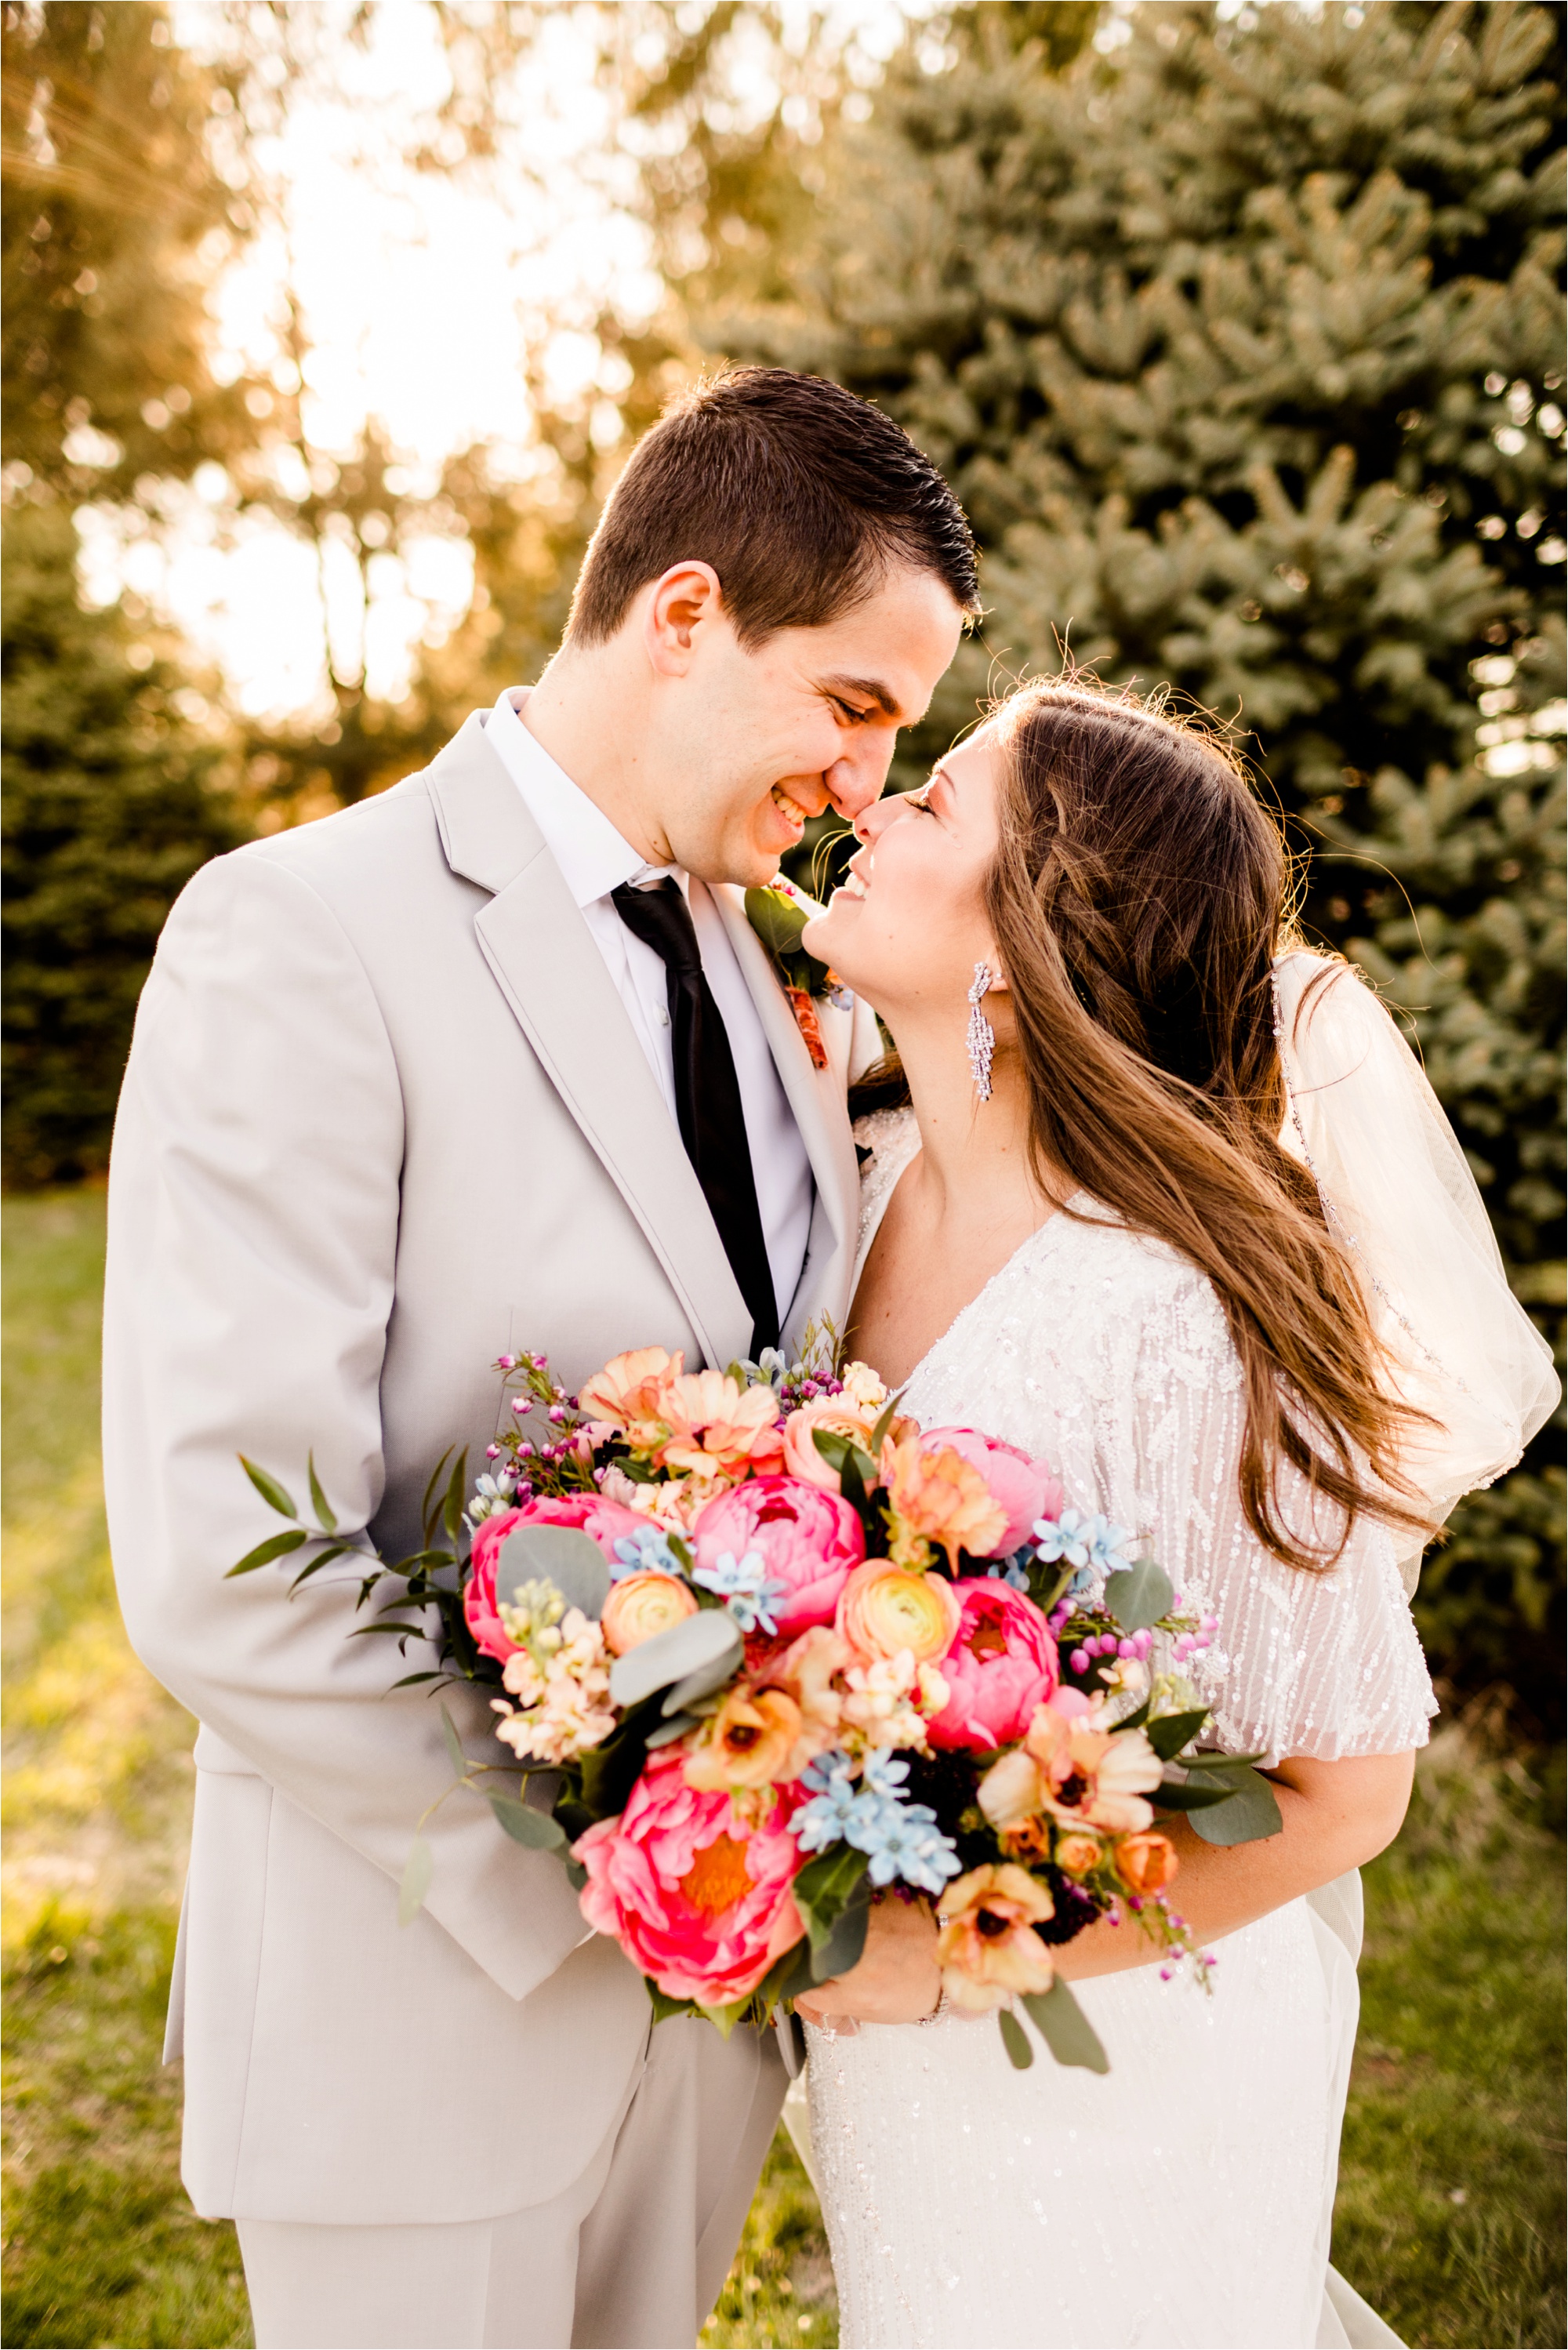 Caitlin and Luke Photography, Illinois Wedding Photographers, Champaign Wedding Photographers, Bloomington Normal Wedding Photographers, Romantic Red and Pink Sunset Styled Shoot_9545.jpg